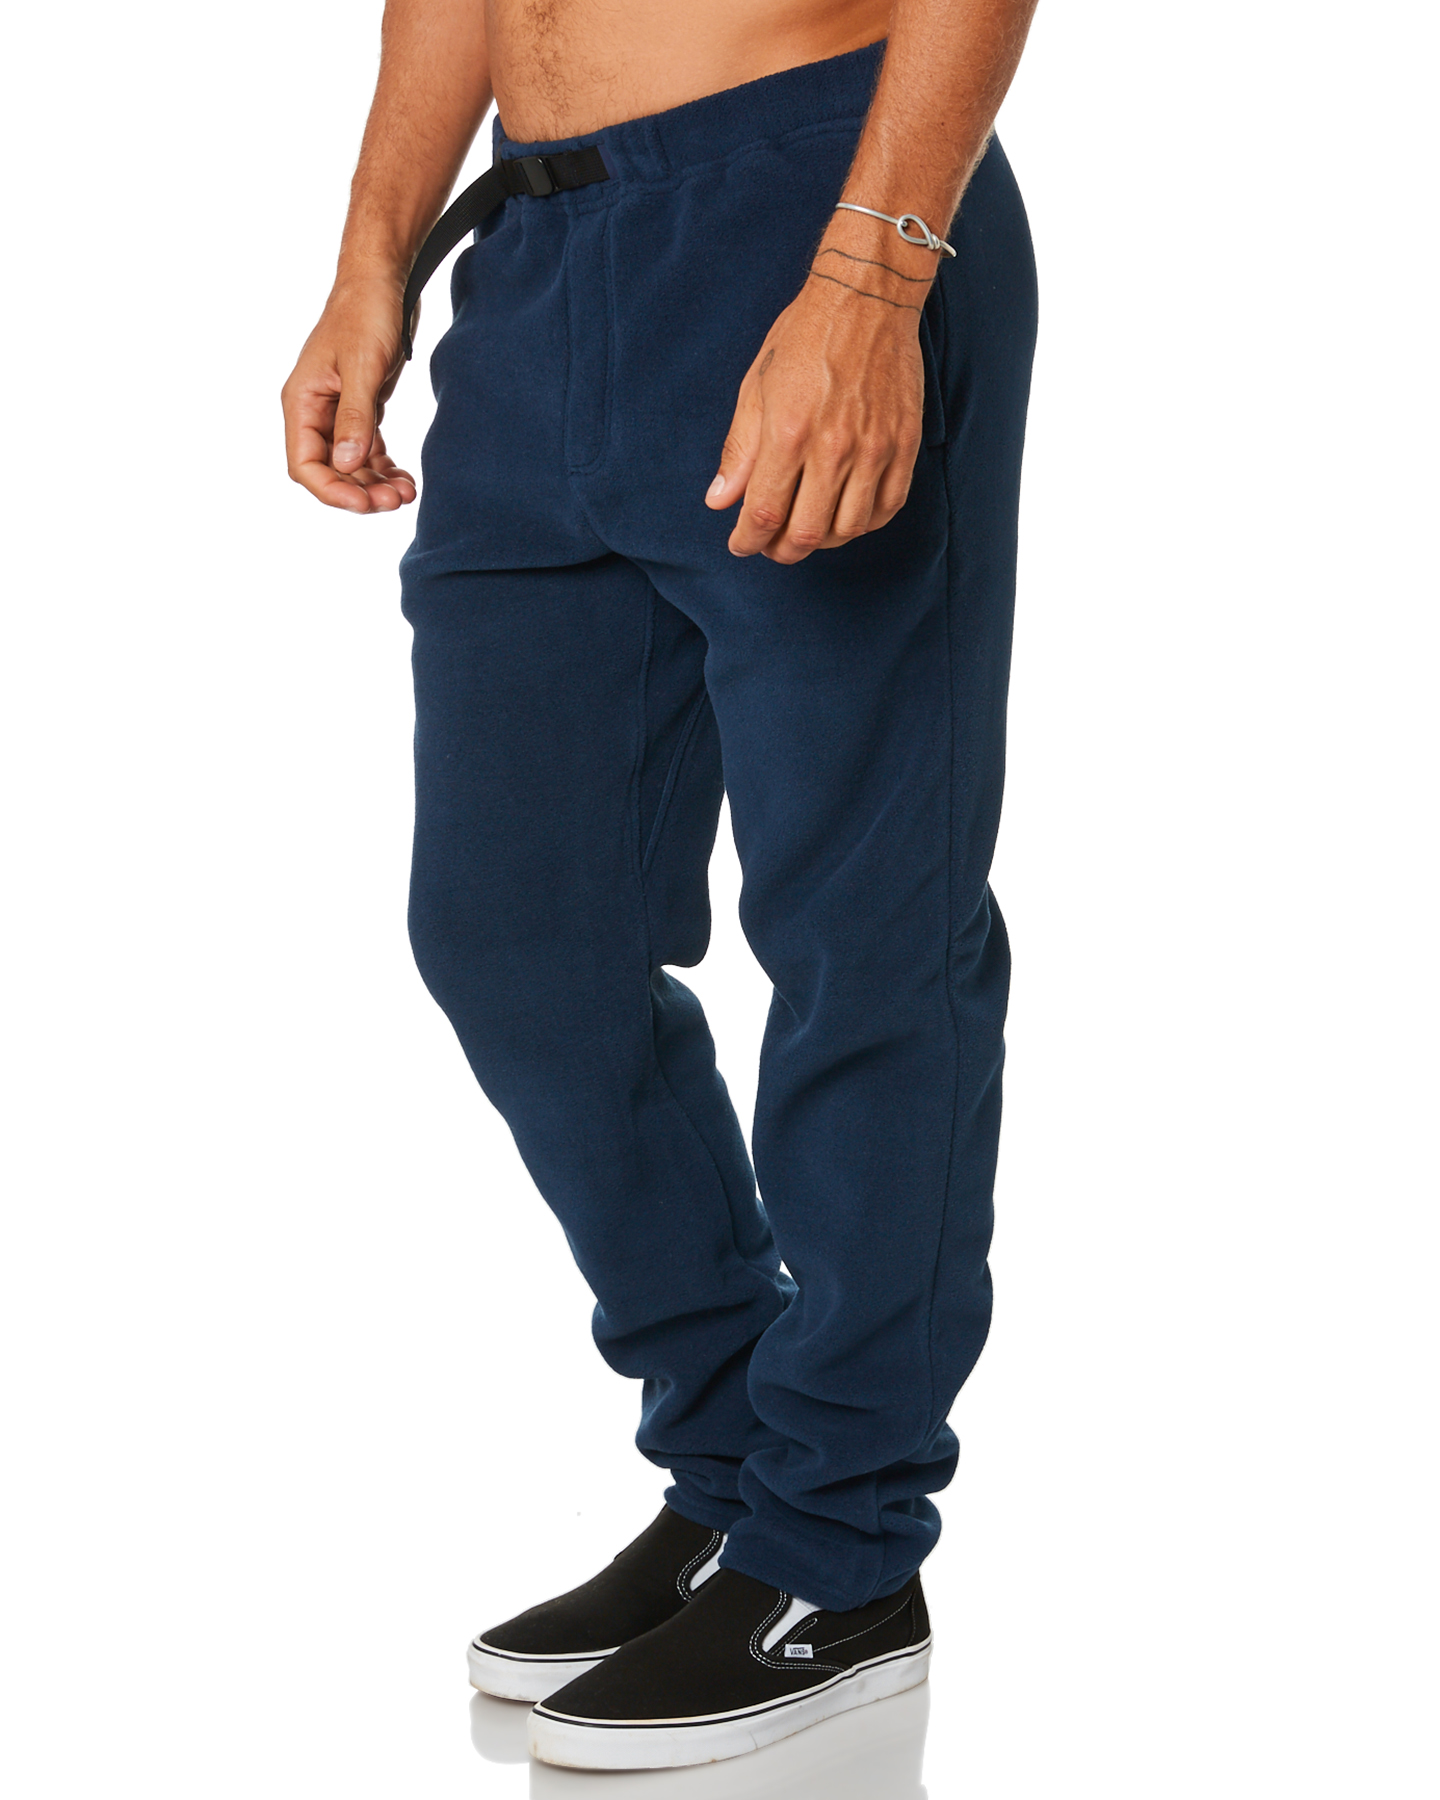 Patagonia Lightweight Synchilla Snap T Mens Pant - New Navy | SurfStitch